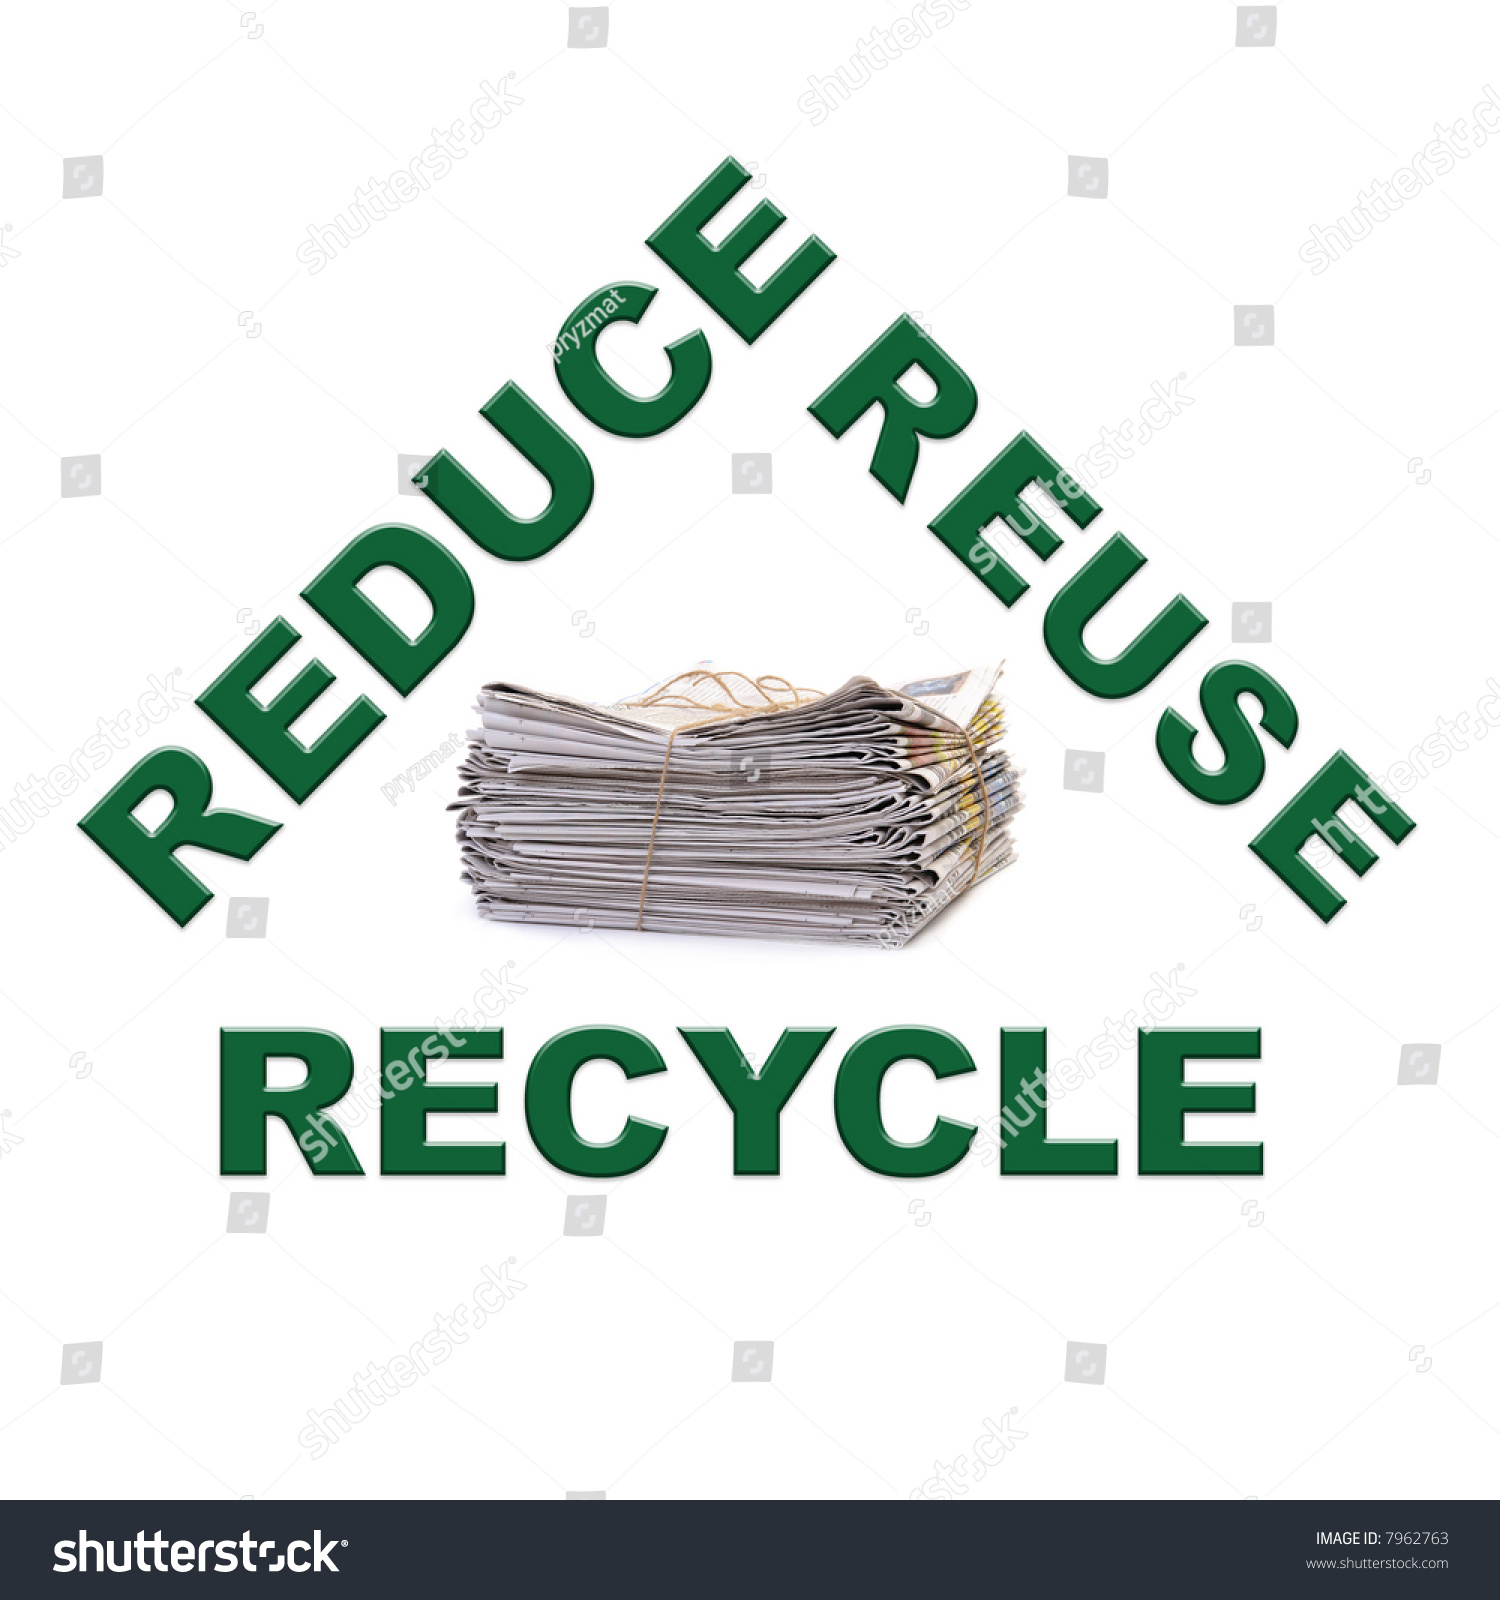 Reduce reuse recycle essay